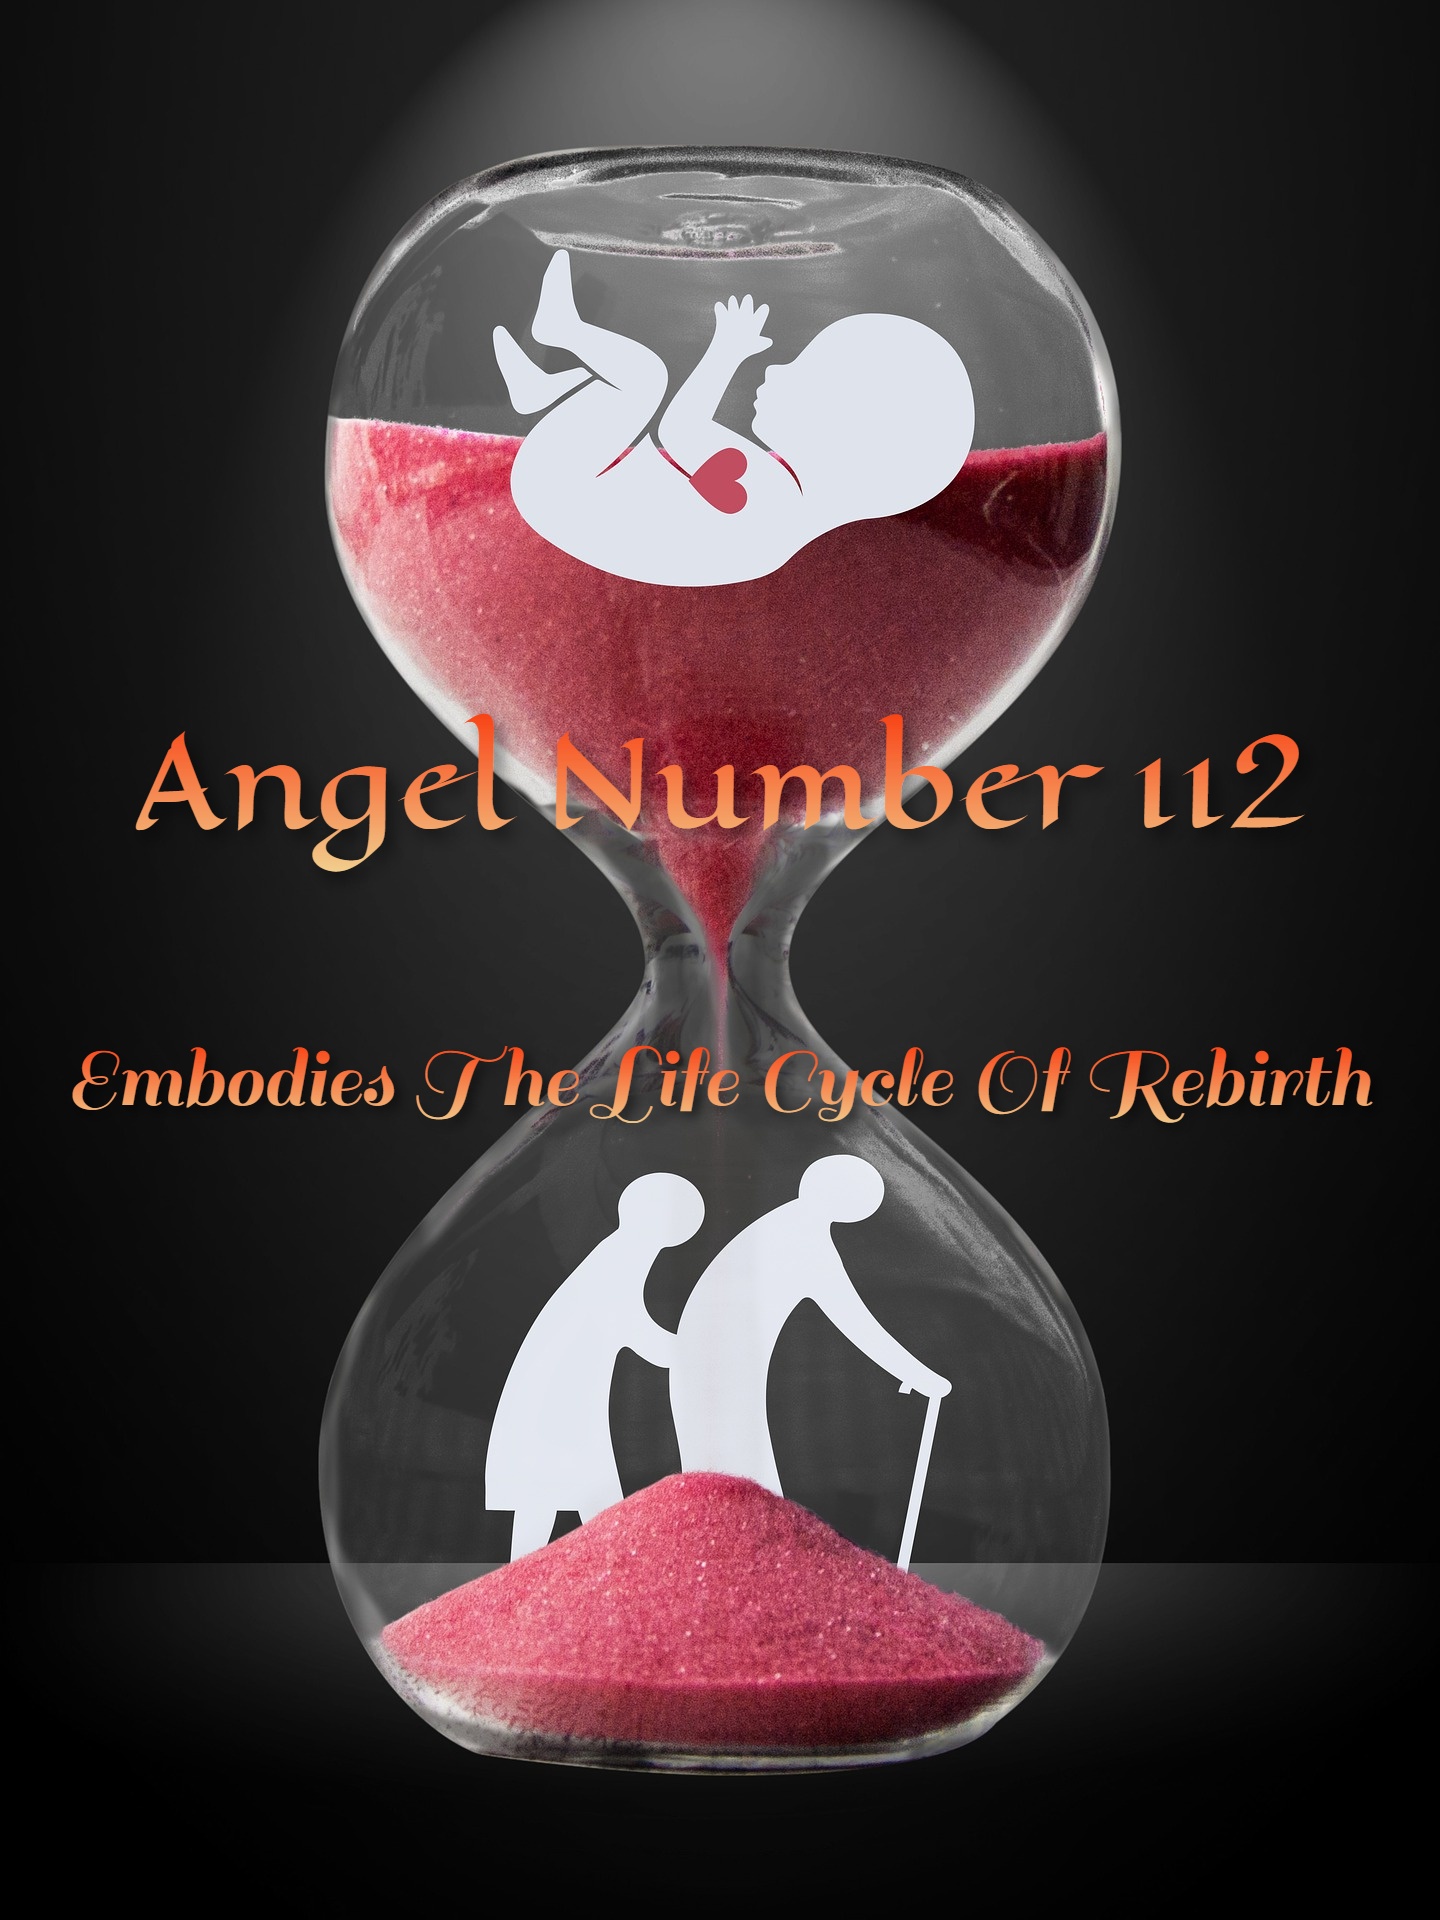 Angel Number 112 - Embodies The Life Cycle Of Rebirth